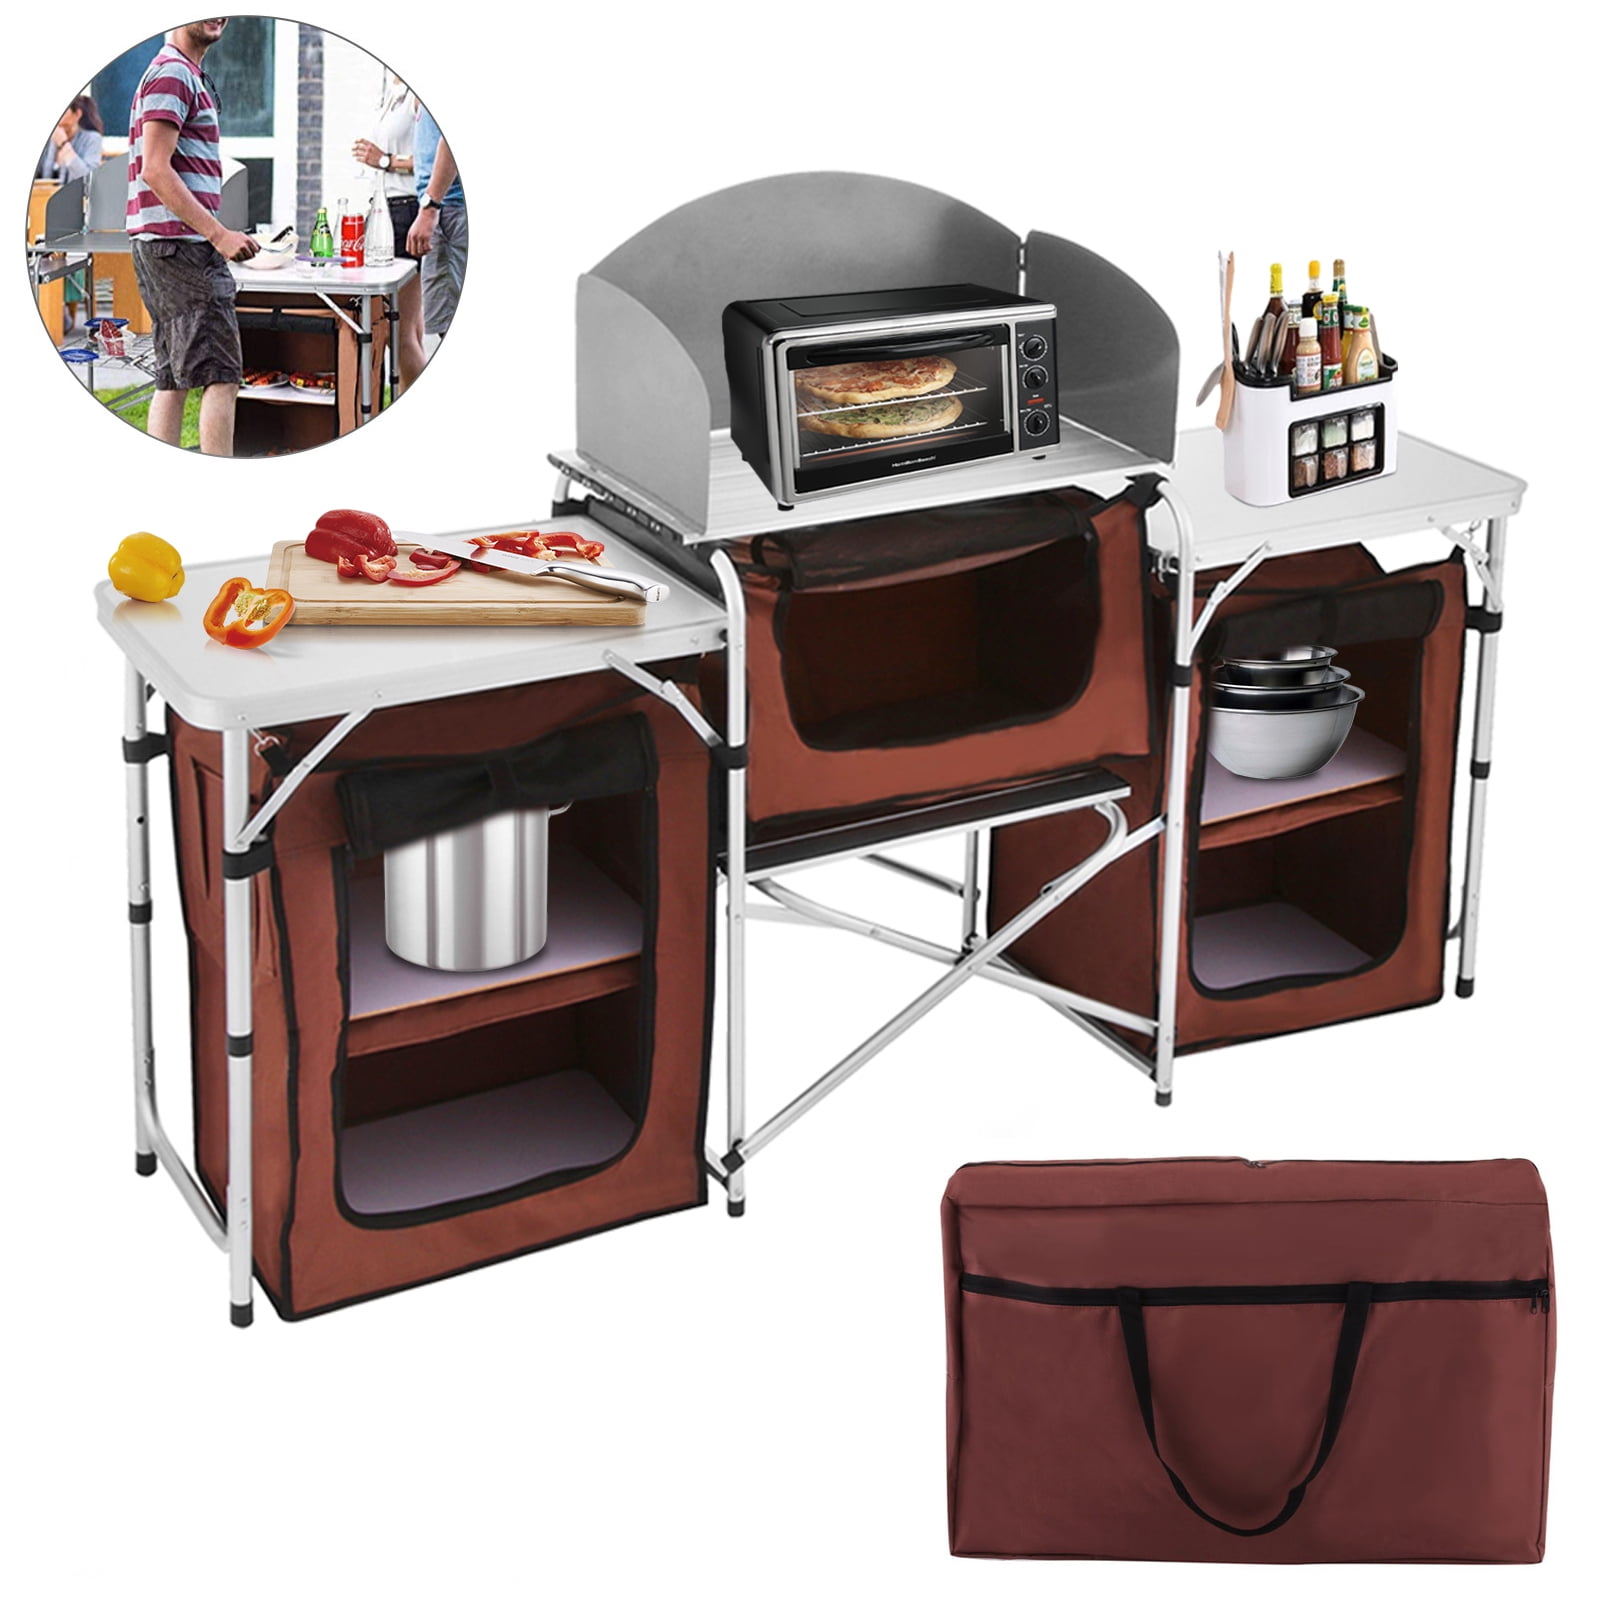 Camping Kitchen Stand Aluminium Storage Unit Bag portable Cooking Windshield new 